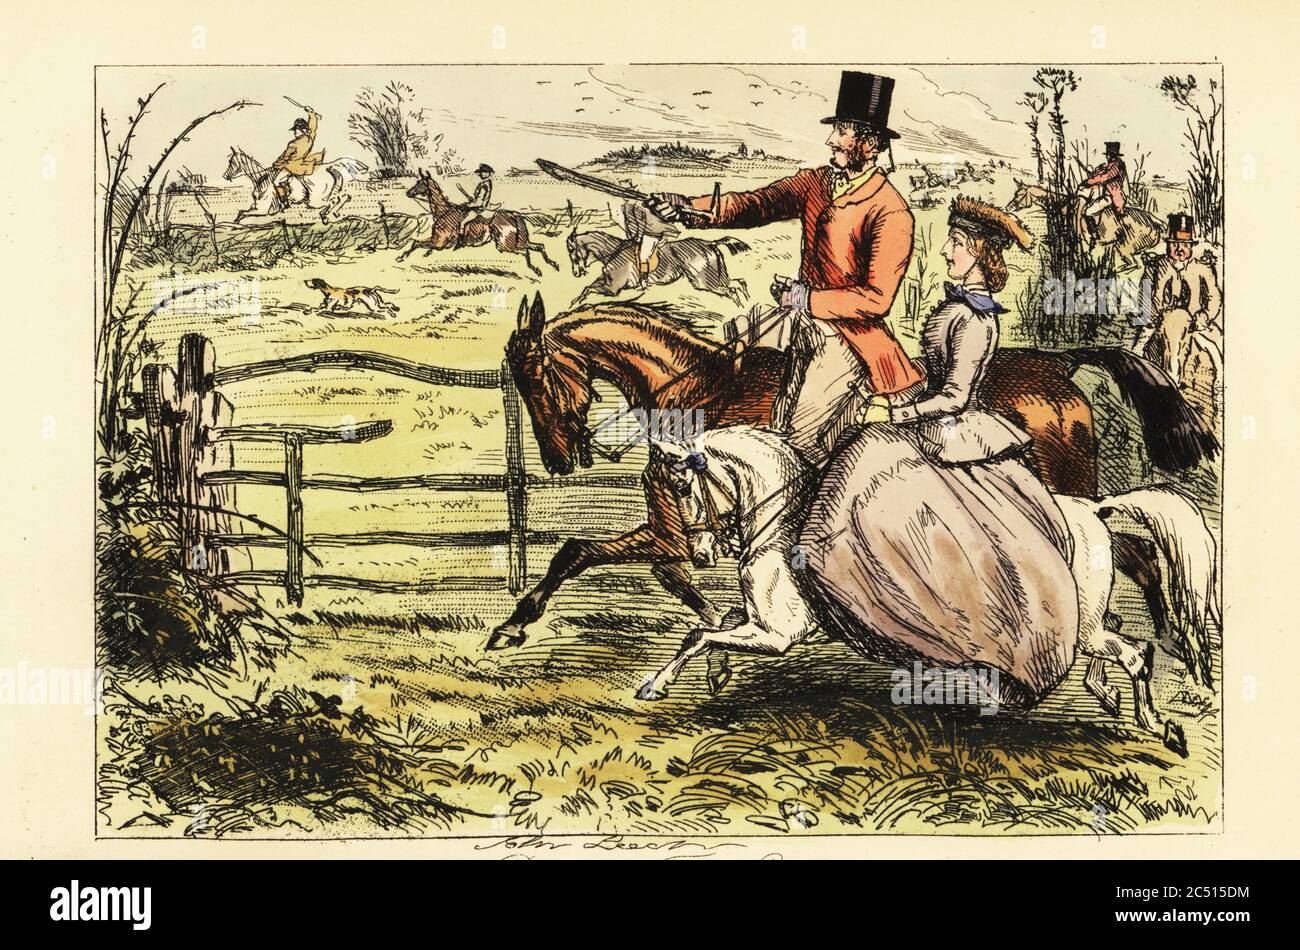 English lady riding sidesaddle in a fox hunt, 19th century. Lord Marchhare points out the fox and hounds to Rosa McDermott. Rosa and the Earl. Handcoloured steel engraving after an illustration by John Leech from Robert Smith Surtees’ Plain or Ringlets?, Bradbury and Evans London, 1860. Leech (1817-1864) was an English caricaturist and illustrator best known for his work for Punch magazine. Stock Photo